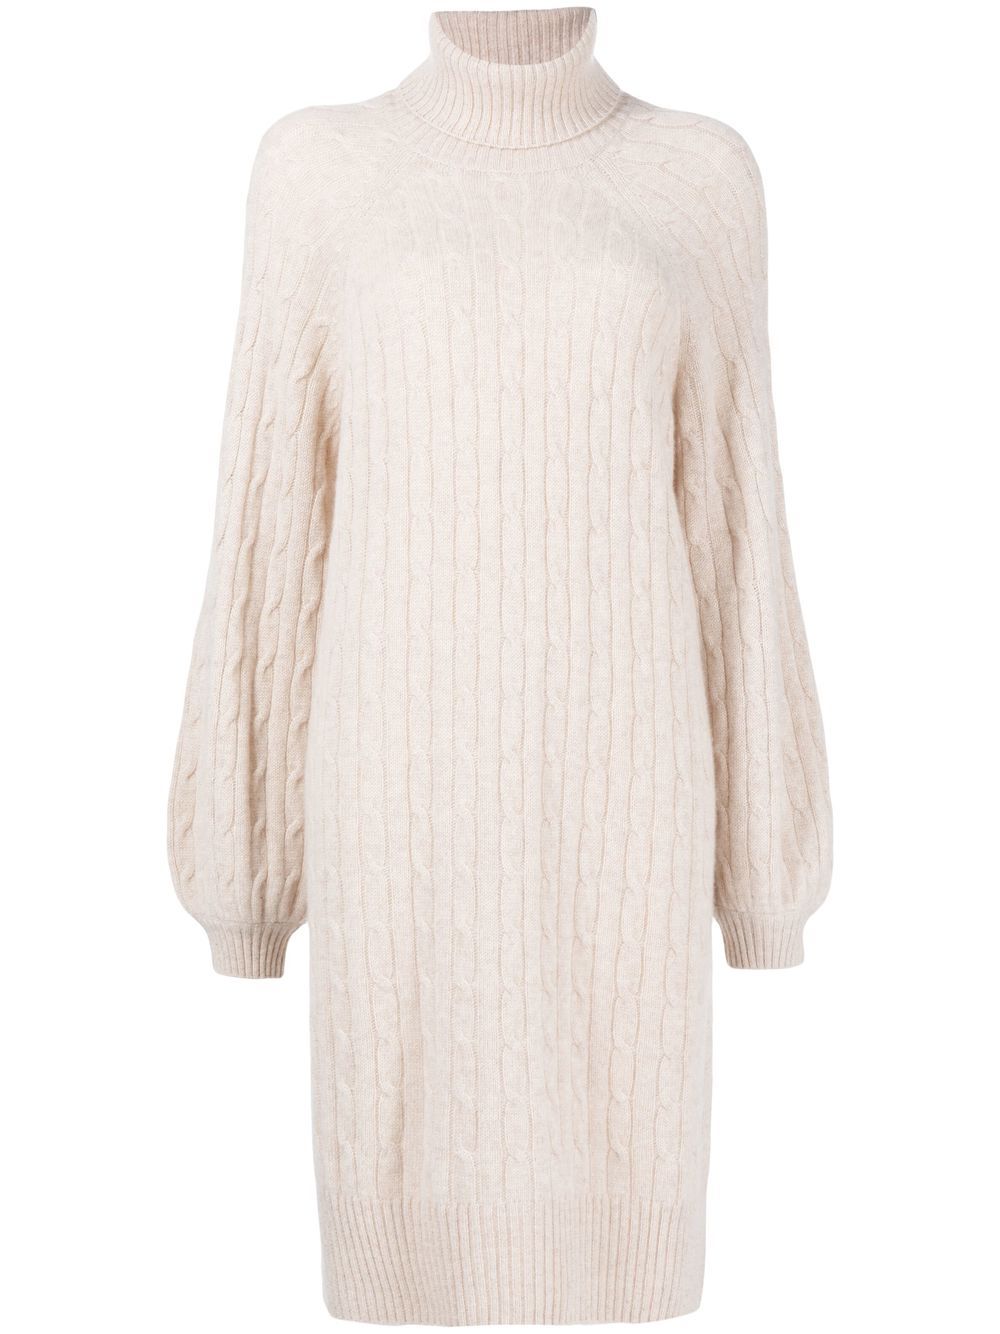 N.peal Cable-knit Organic Cashmere Dress In White